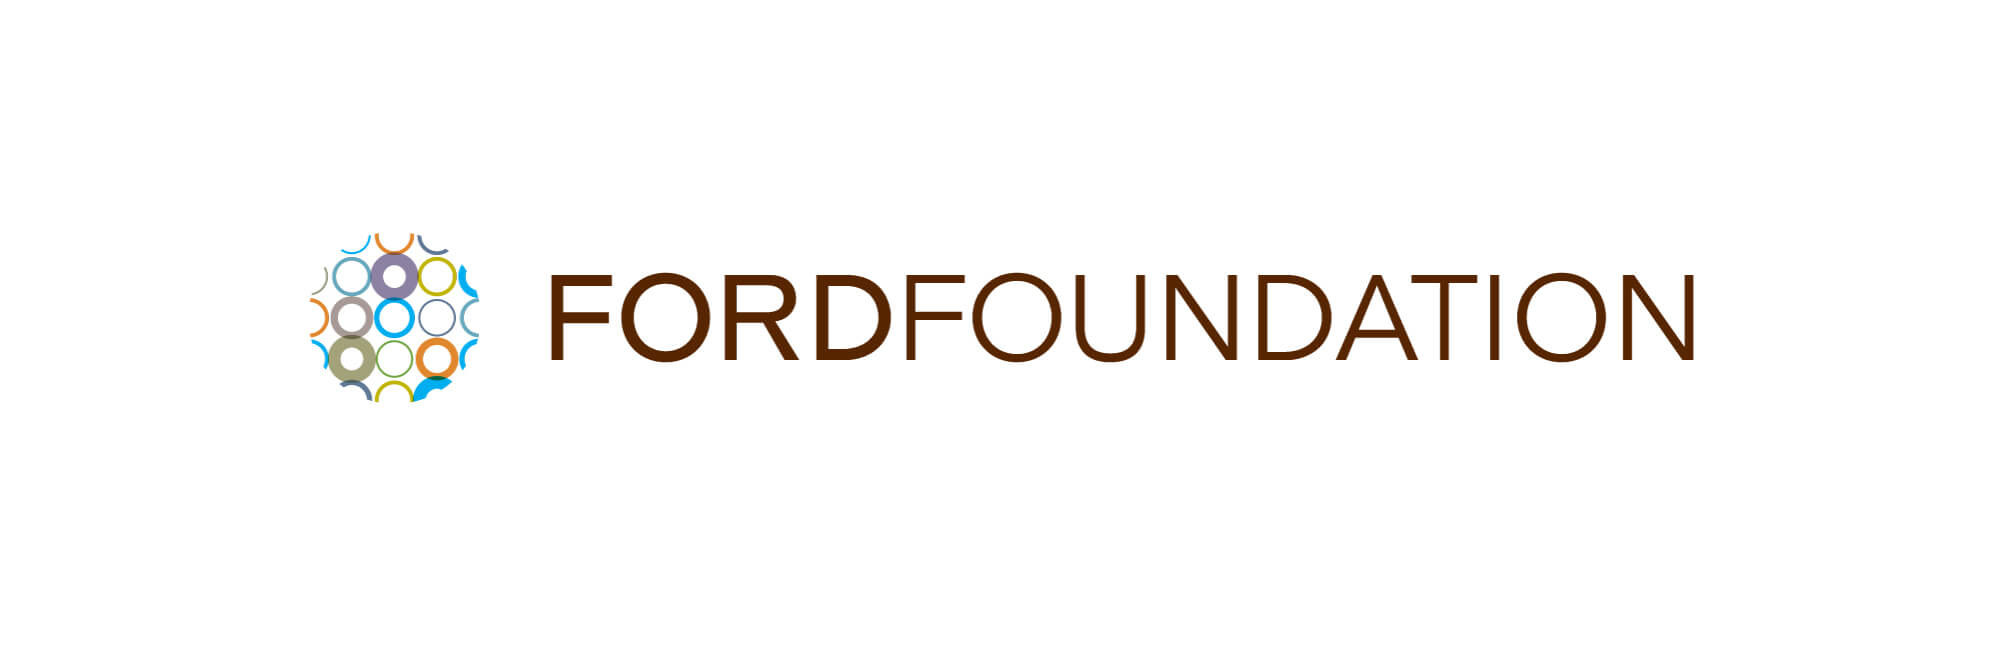 Ford foundation grants #8